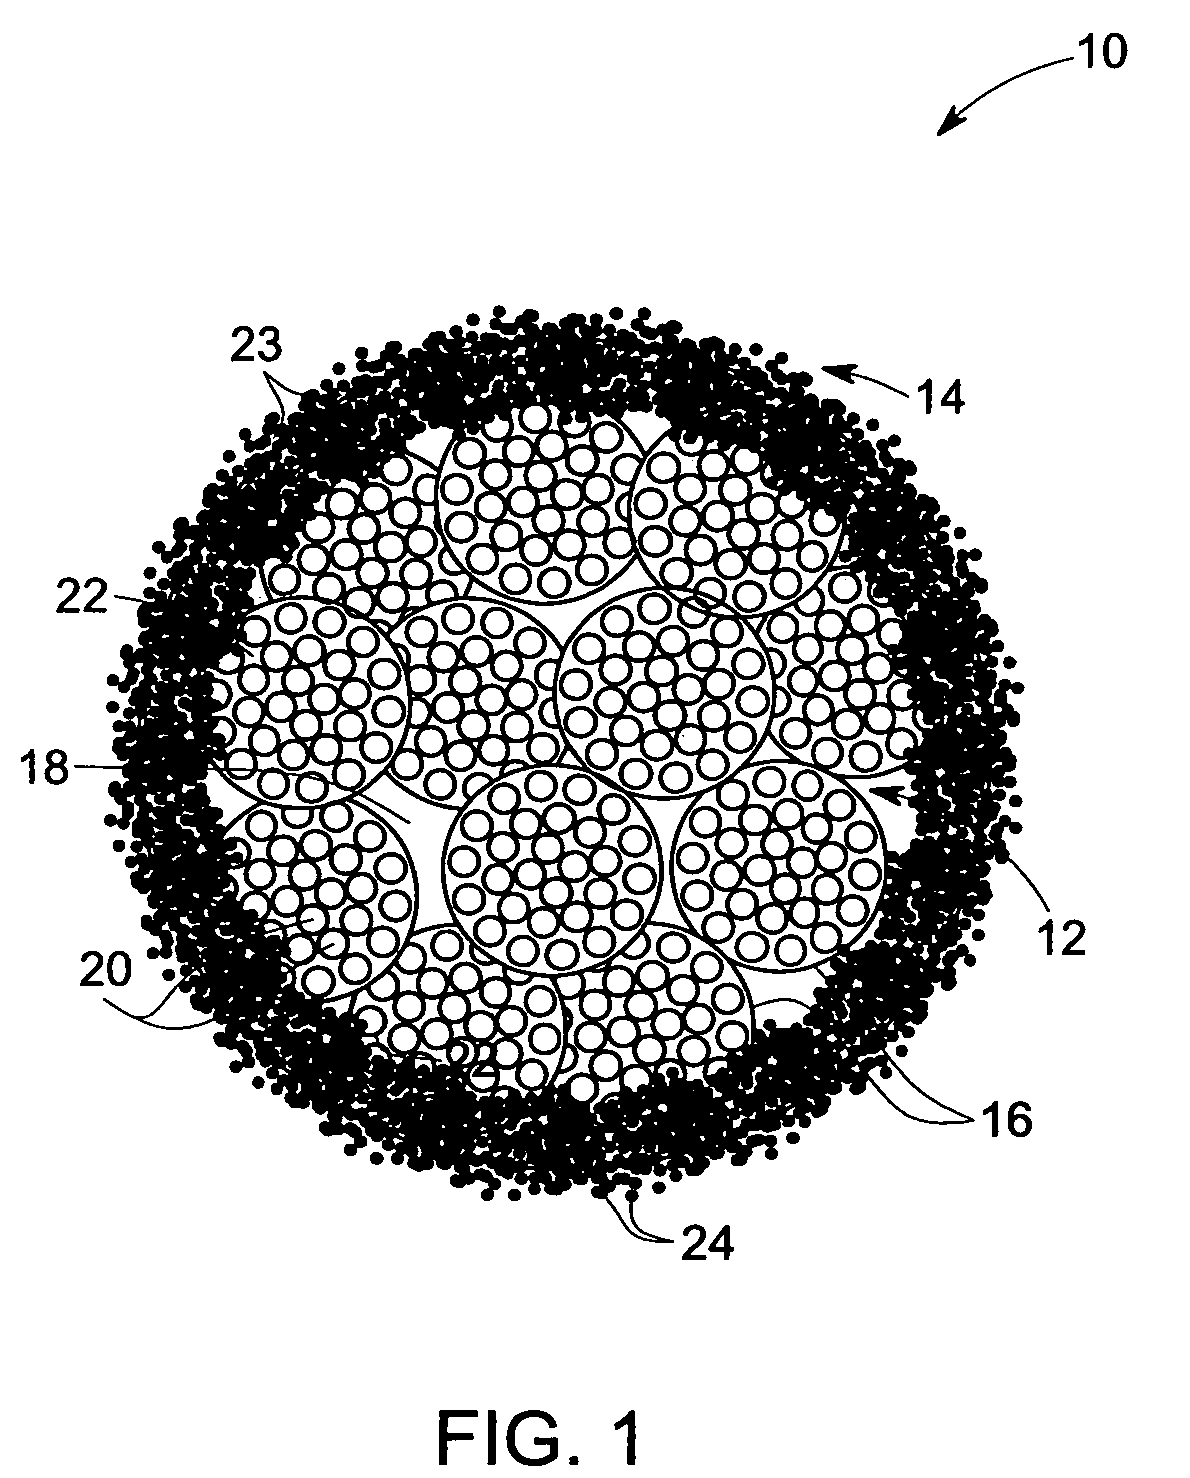 Core-shell ceramic particulate and method of making